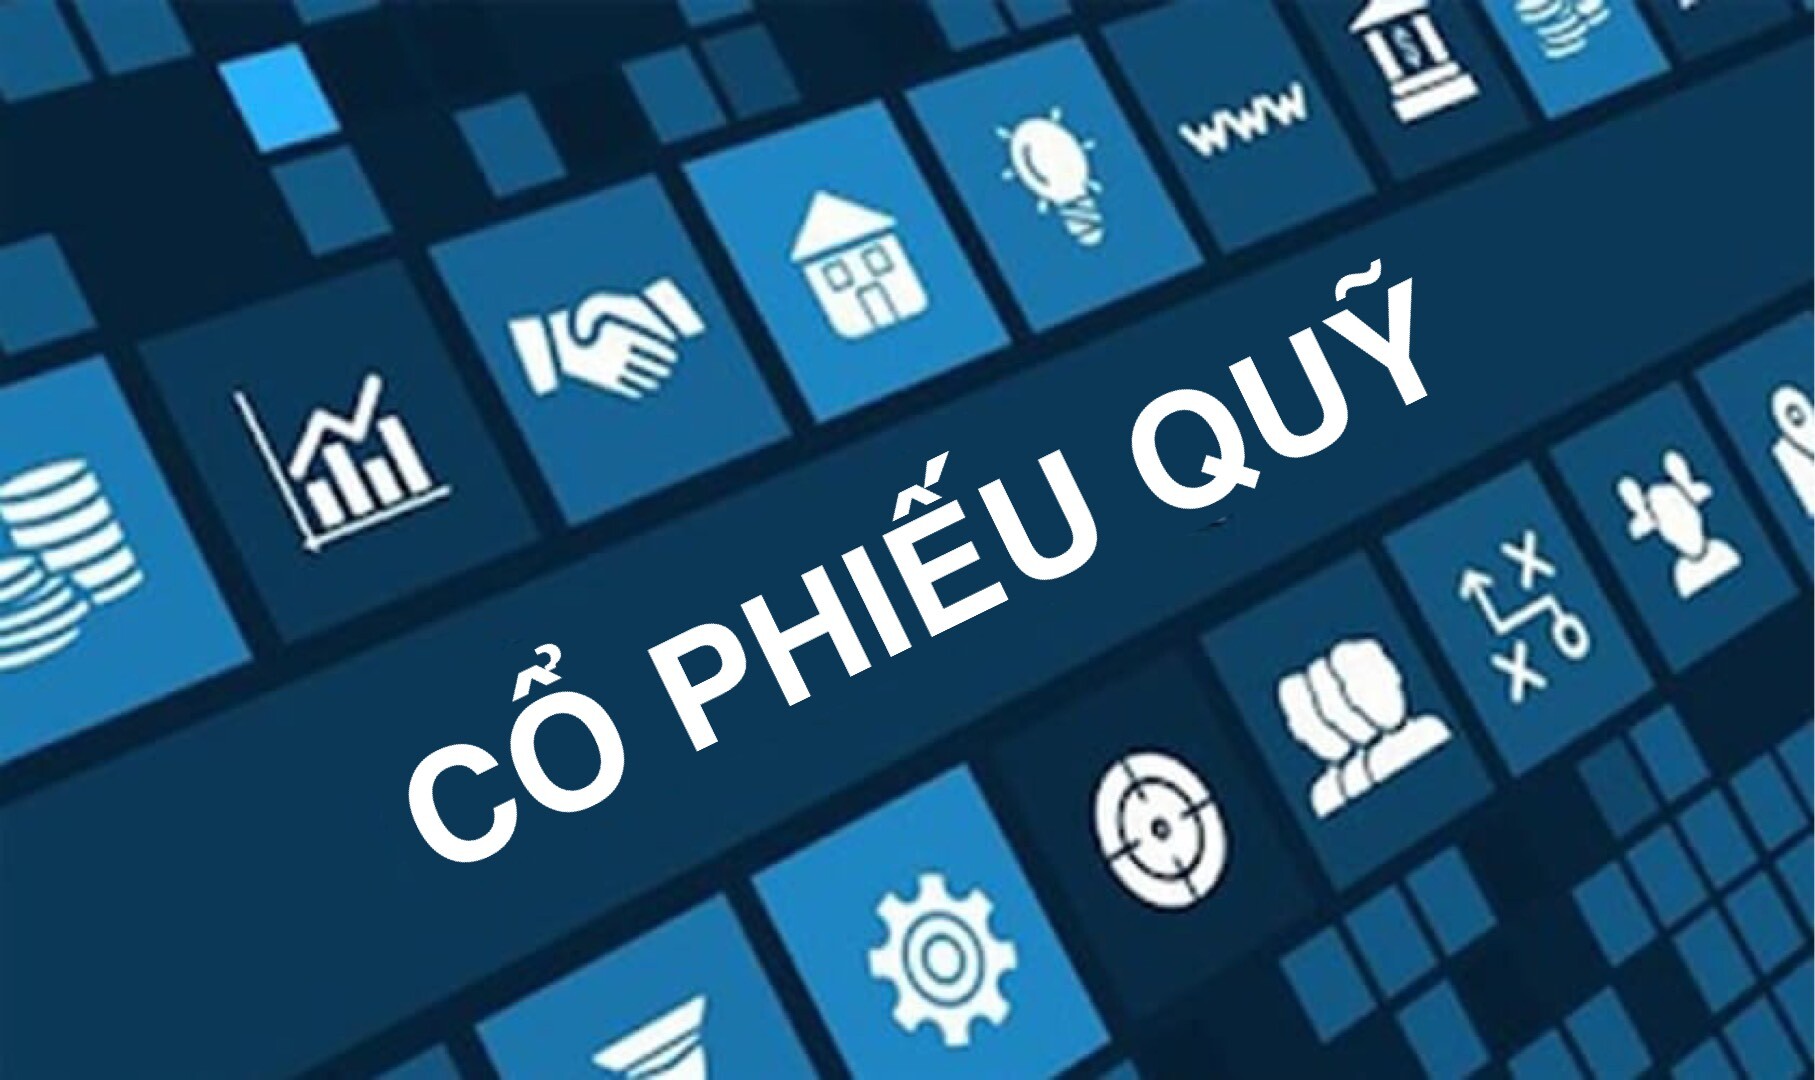 co-phieu-quy